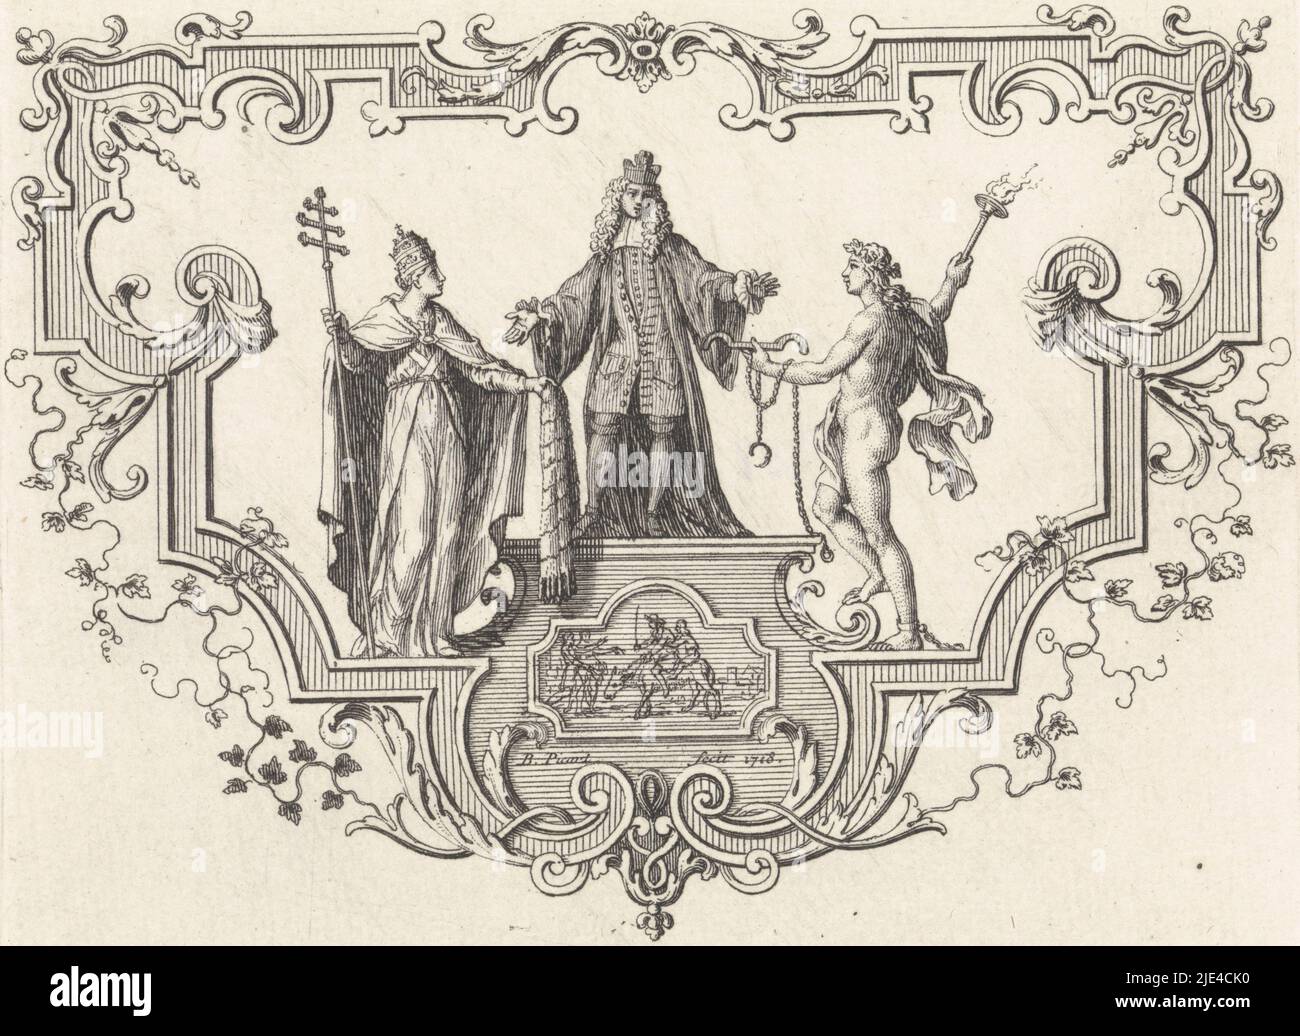 François de Maucroix flanked by the Church and Hymen, Bernard Picart, 1718, The poet François de Maucroix on a pedestal is flanked by the personification of the Church, dressed as the Pope, and the marriage god Hymen, who offers him the yoke of marriage. The representation is framed in an ornamental frame., print maker: Bernard Picart, (mentioned on object), Amsterdam, 1718, paper, etching, engraving, h 100 mm × w 127 mm Stock Photo